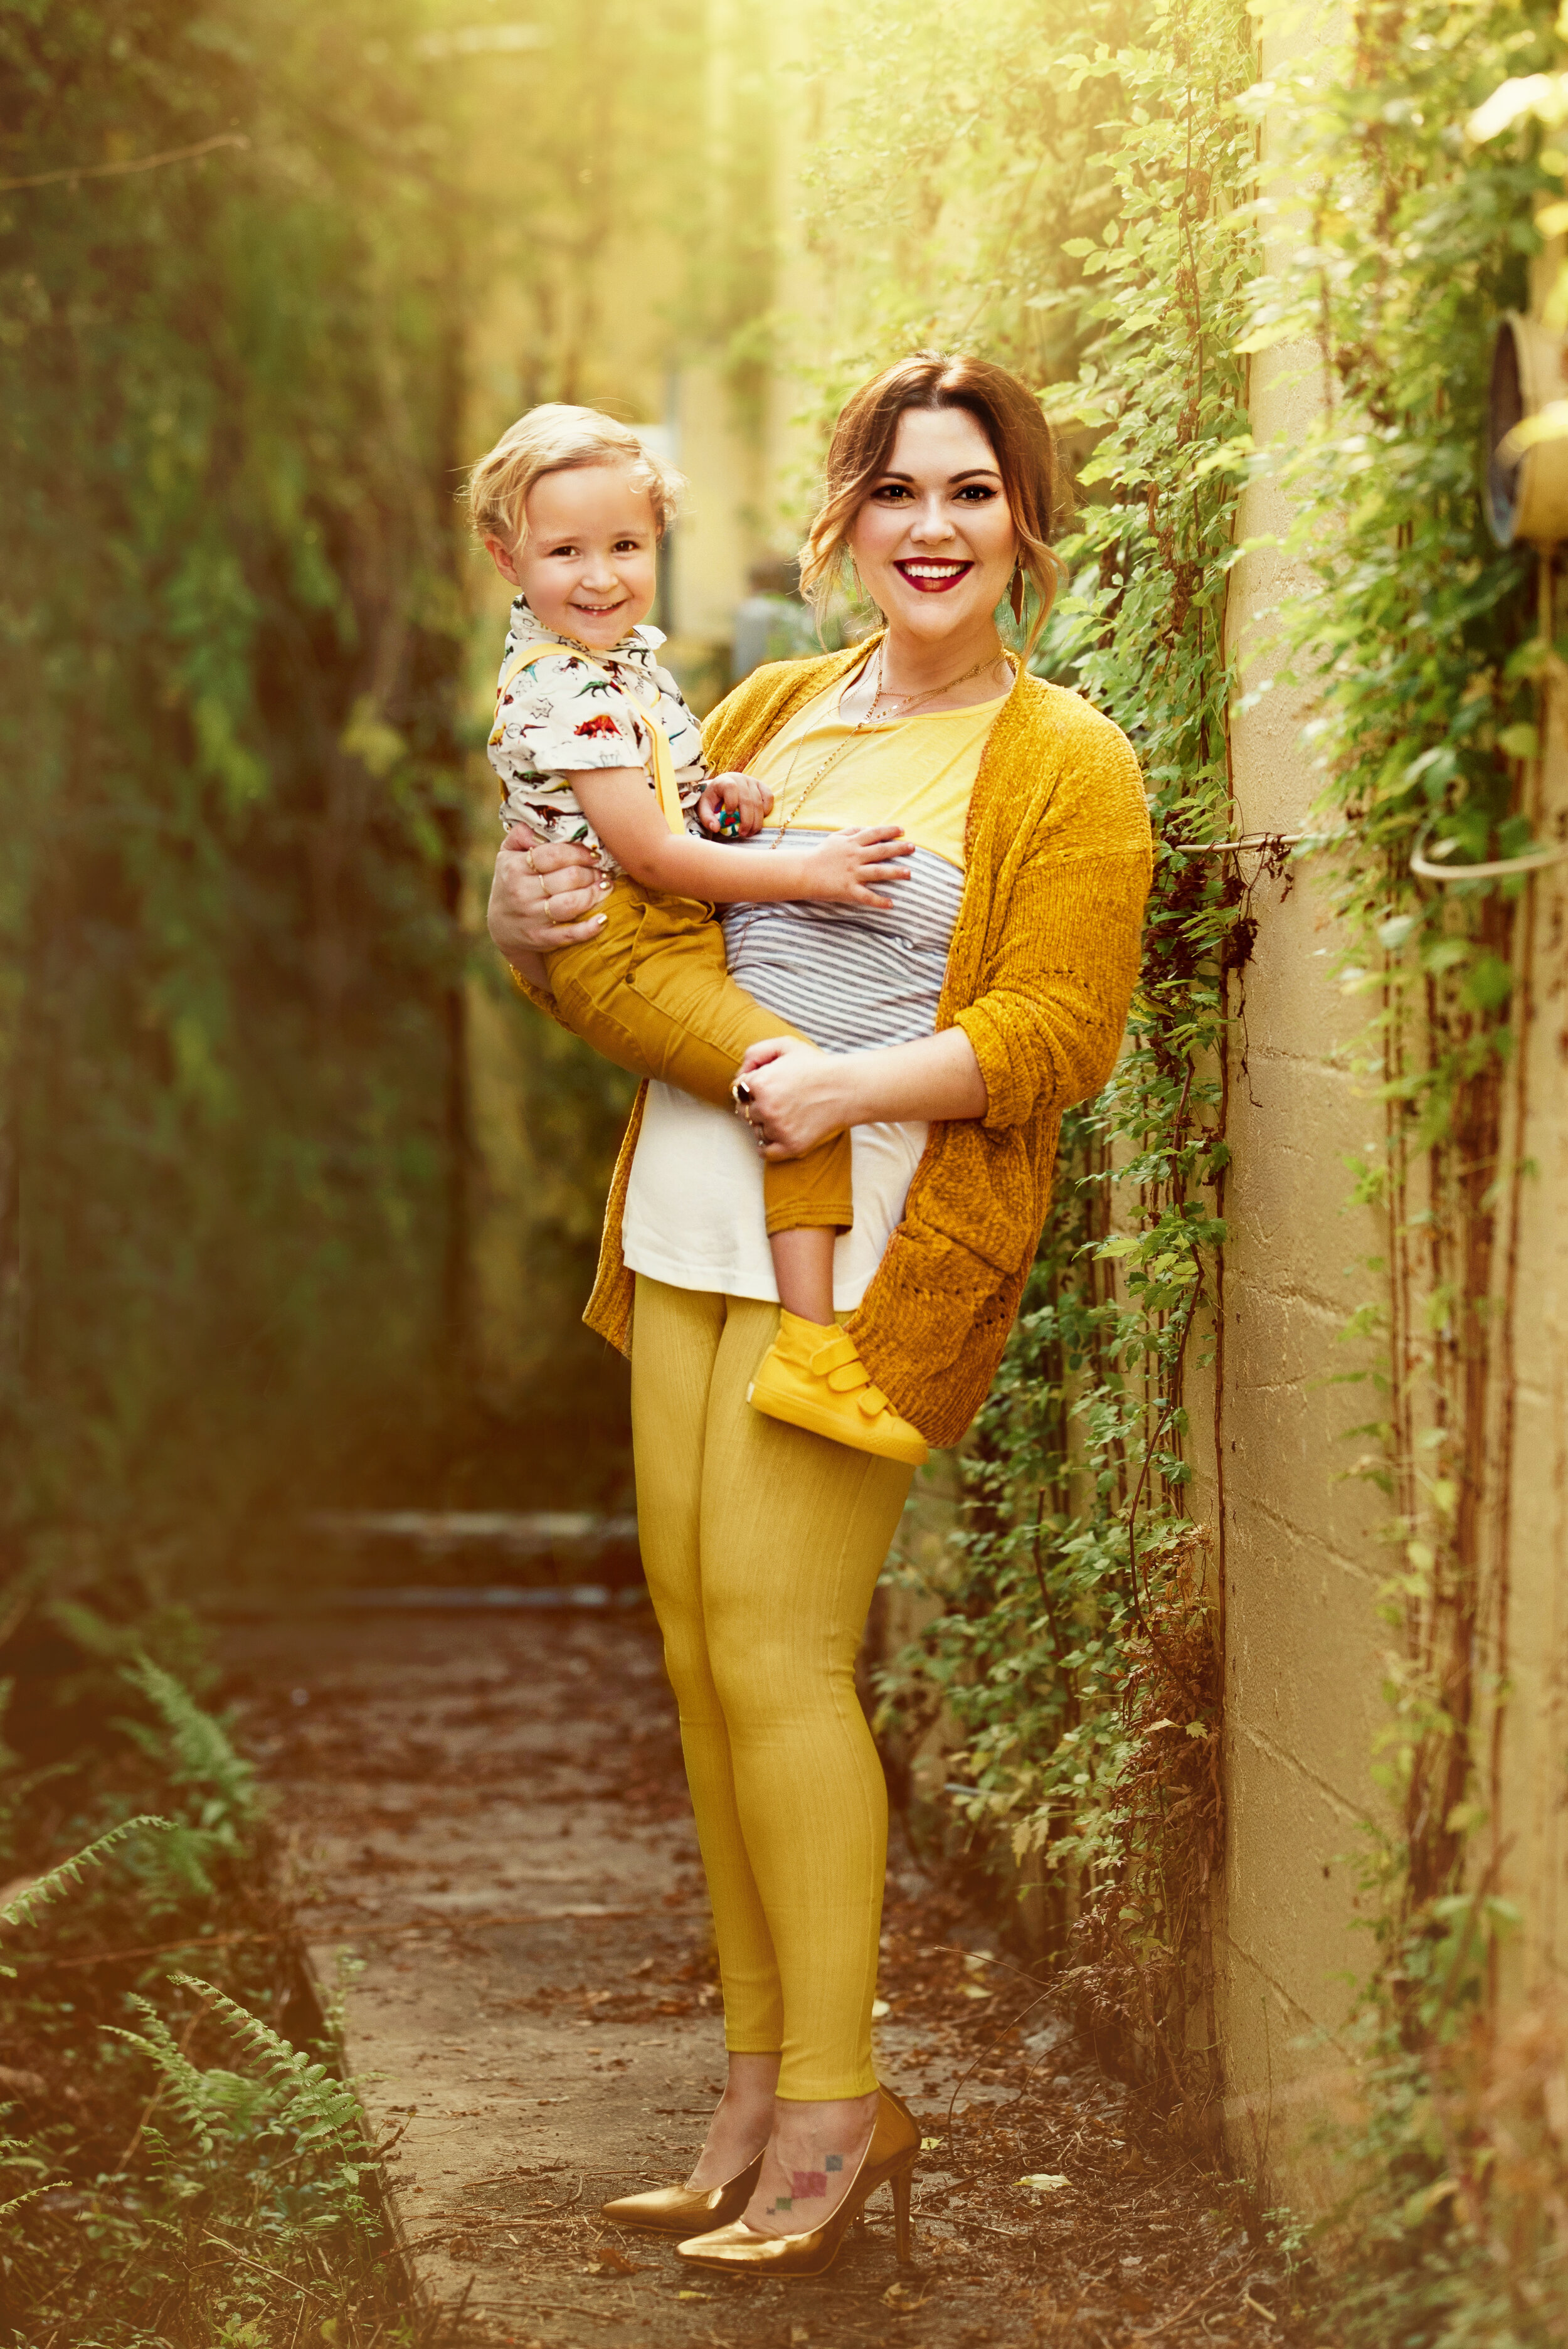 Erika Pearce Photography | Maternity and Birth | Youngest Son Ark Harrison Photoshoot | Kids in Color Yellow